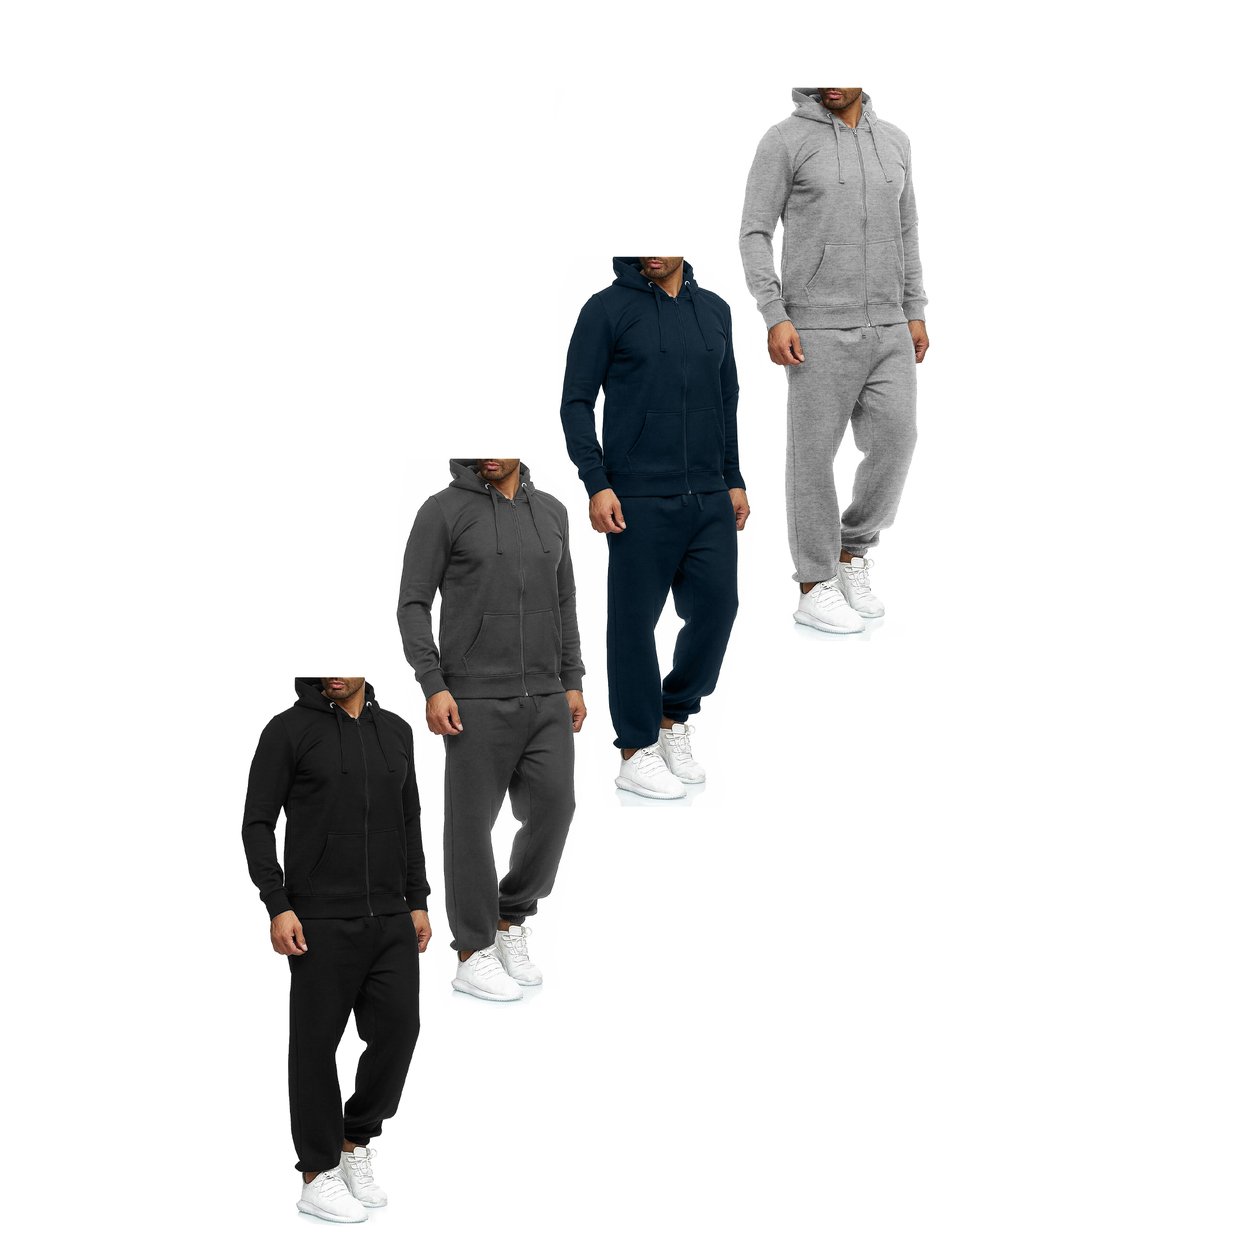 2-Pack: Men's Casual Big & Tall Athletic Active Winter Warm Fleece Lined Full Zip Tracksuit Jogger Set - Navy, Xx-large